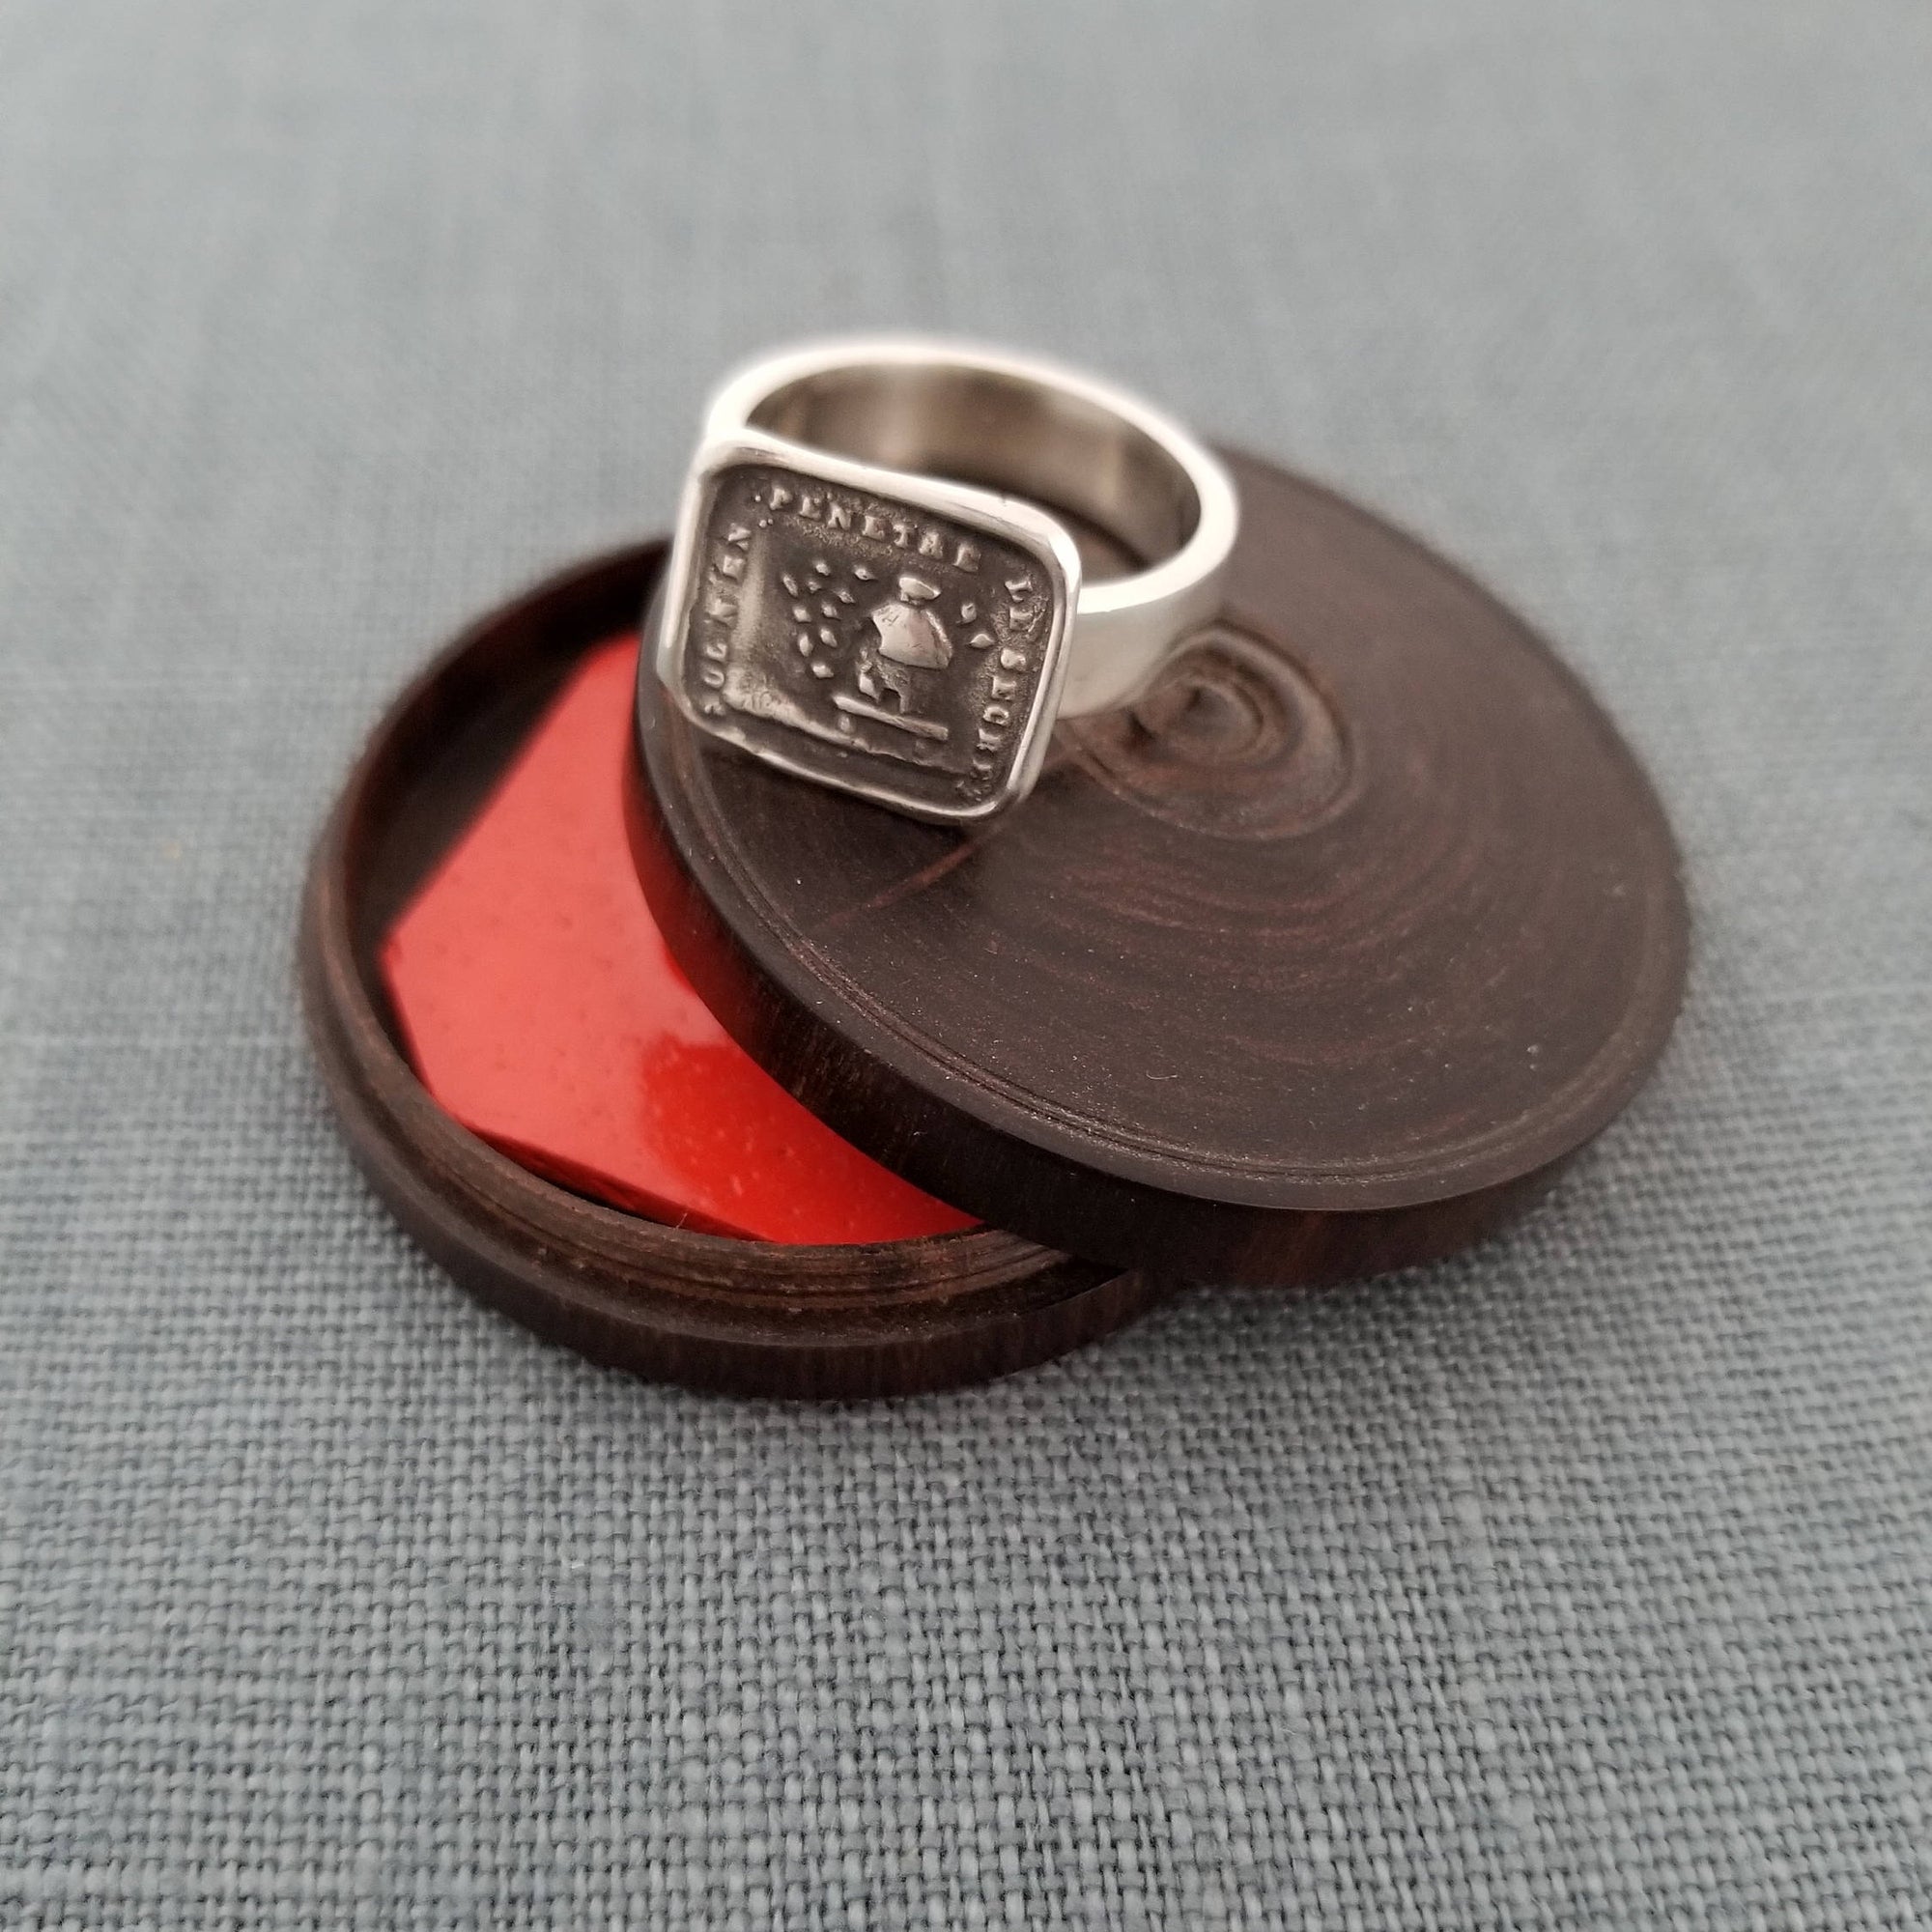 Secret - Bees and Beehive Wax Seal Wax Seal Ring